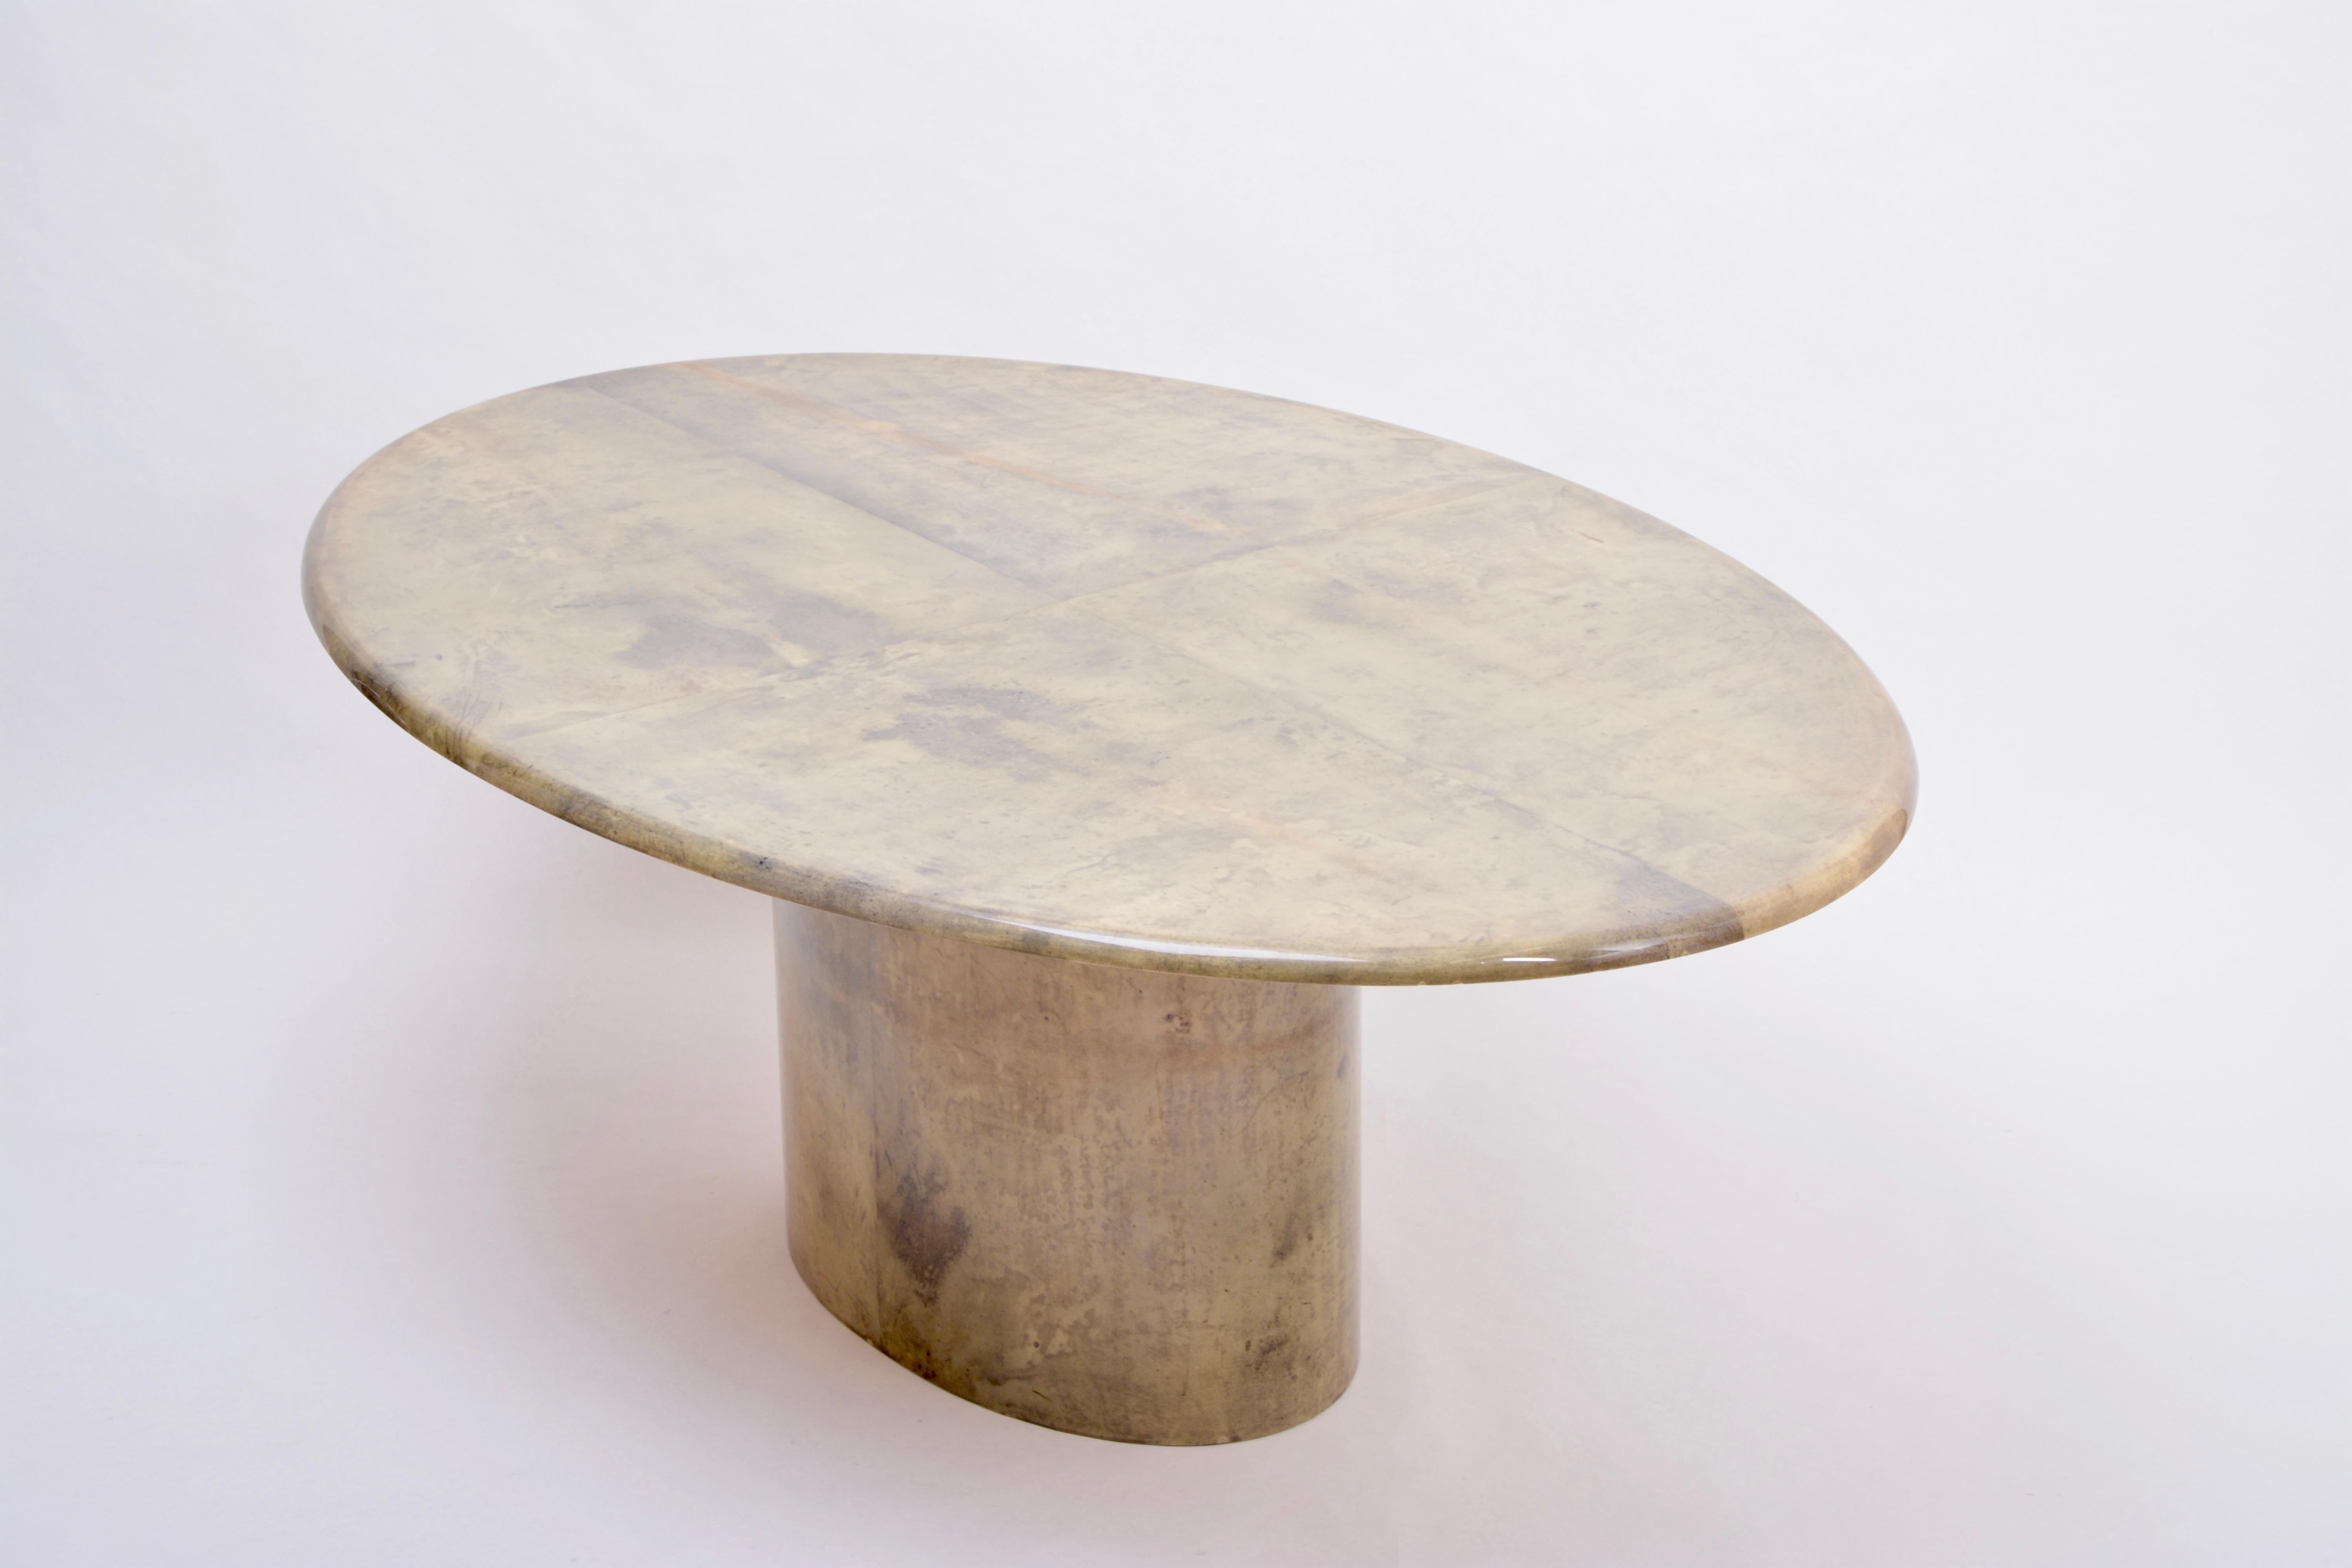 Oval dining table designed by Aldo Tura and produced in Italy in the 1970s. This dining table is a very strong example of his work, simple in form, with a soft curved oval top affixed to an oval pedestal base. The ethereal lacquered goatskin gives a